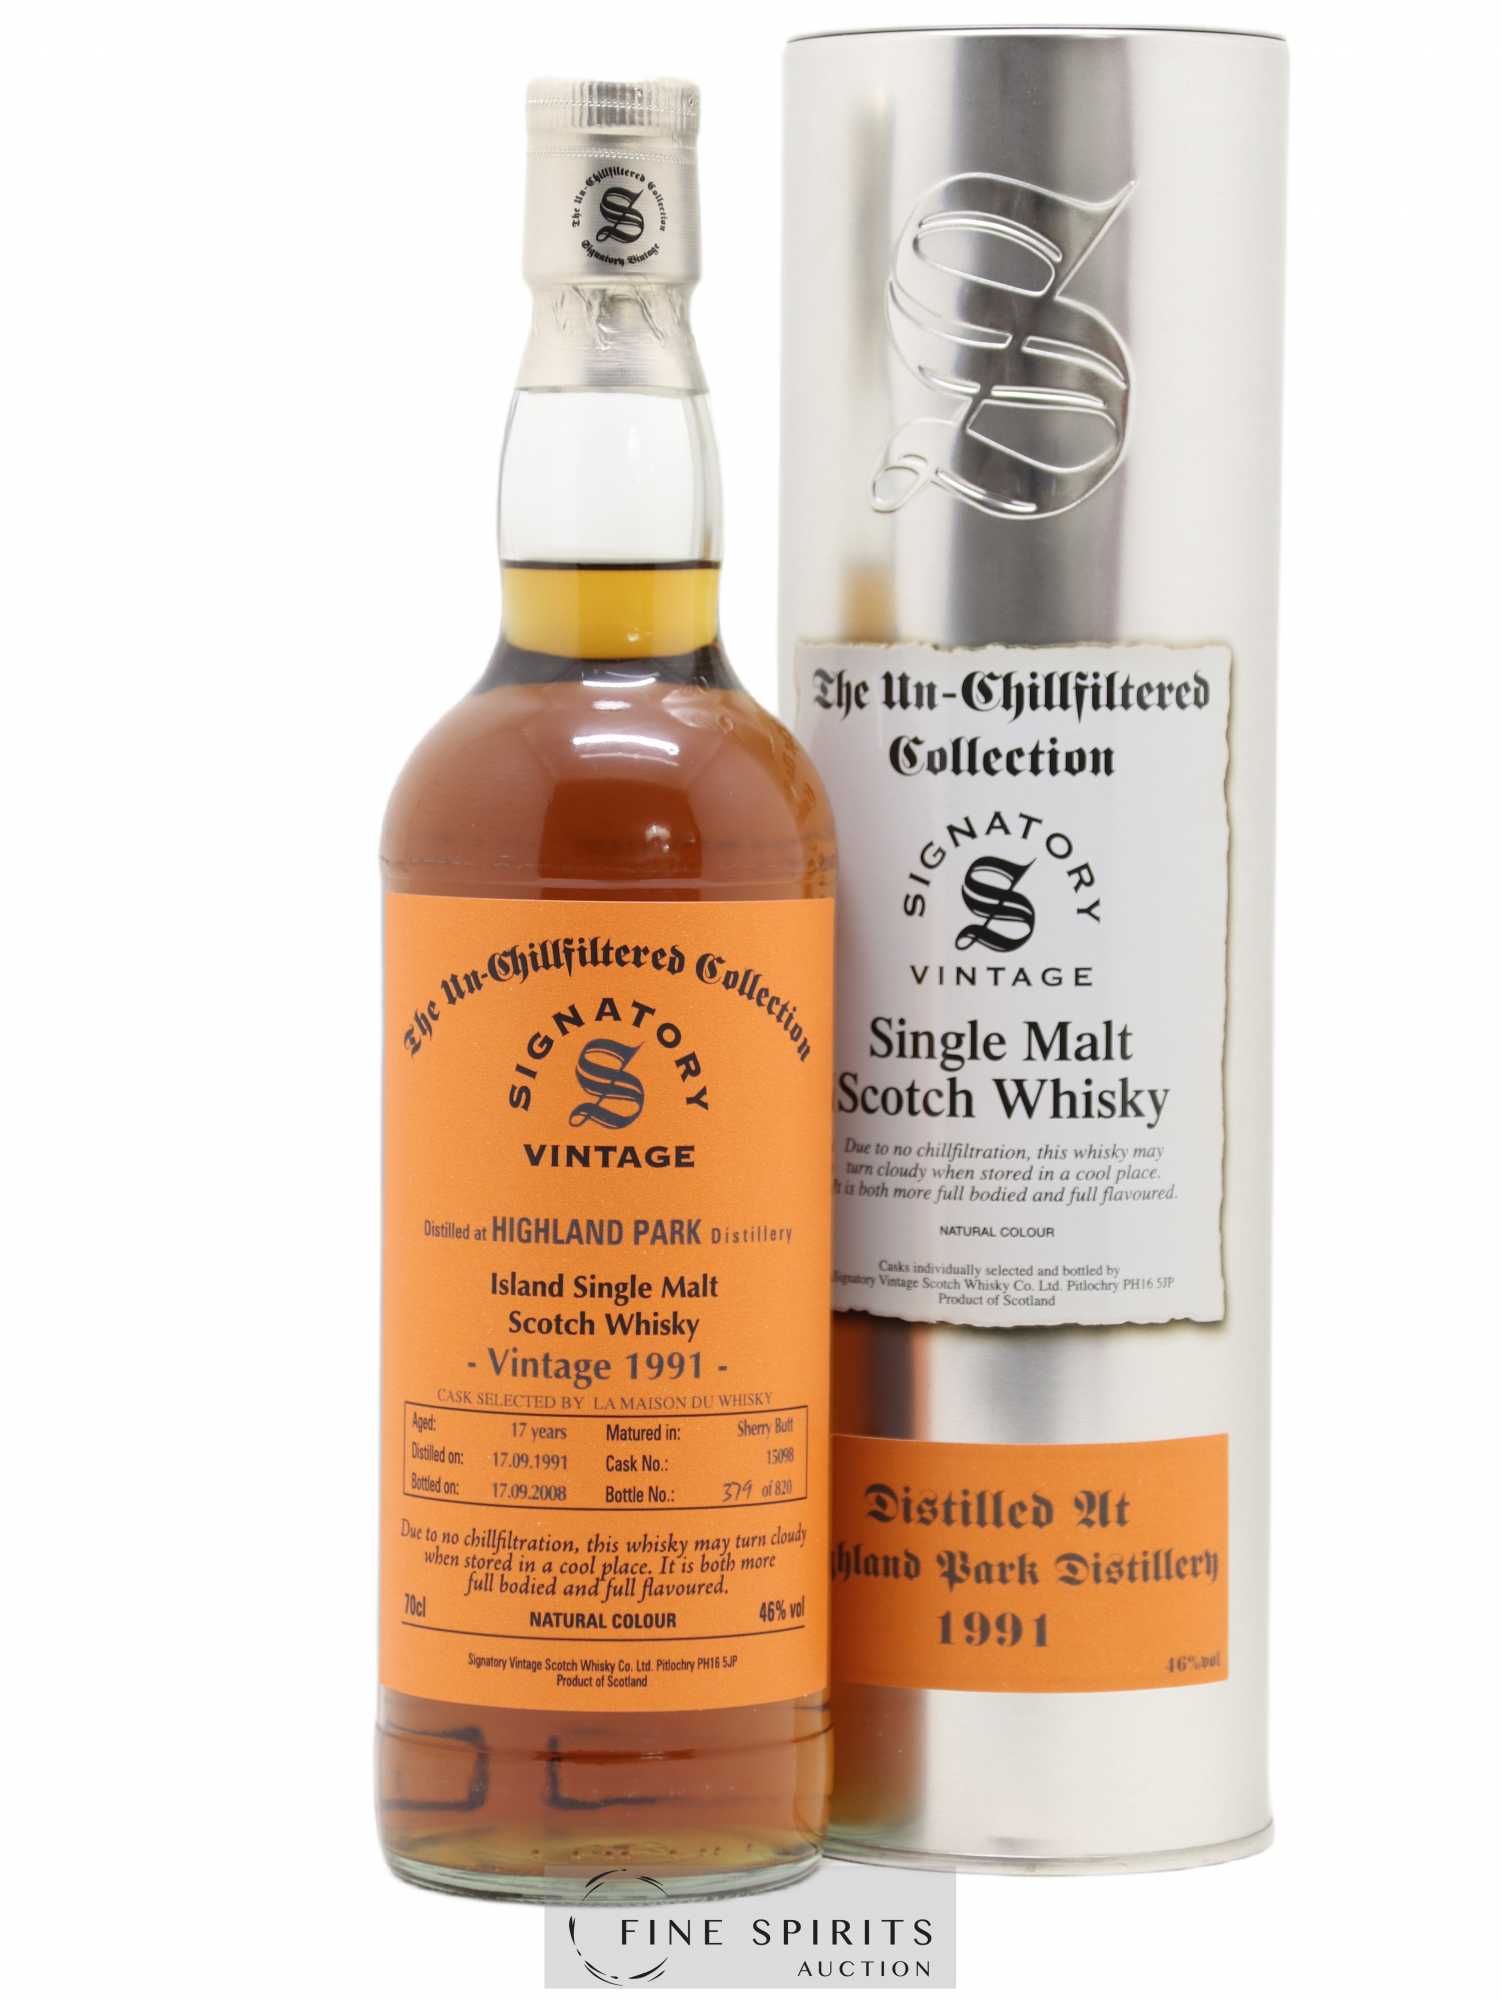 Highland Park 17 years 1991 Signatory Vintage Sherry Butt n°15098 - One of 820 - bottled 2008 LMDW The Un-Chillfiltered Collection 